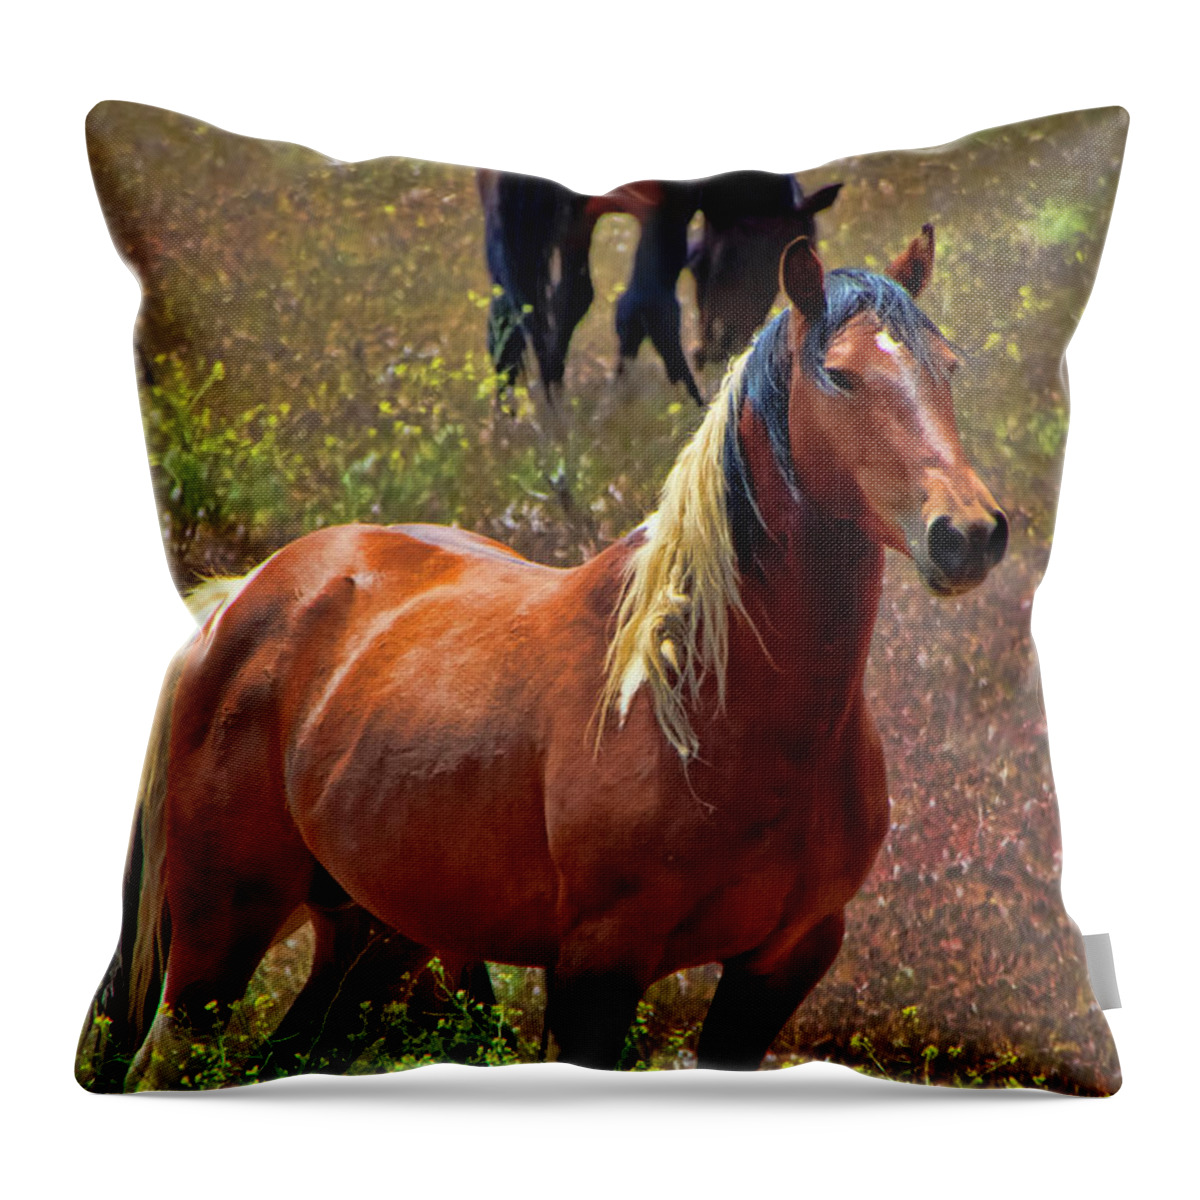 Horses Throw Pillow featuring the photograph Wild Paint Stallion by Waterdancer